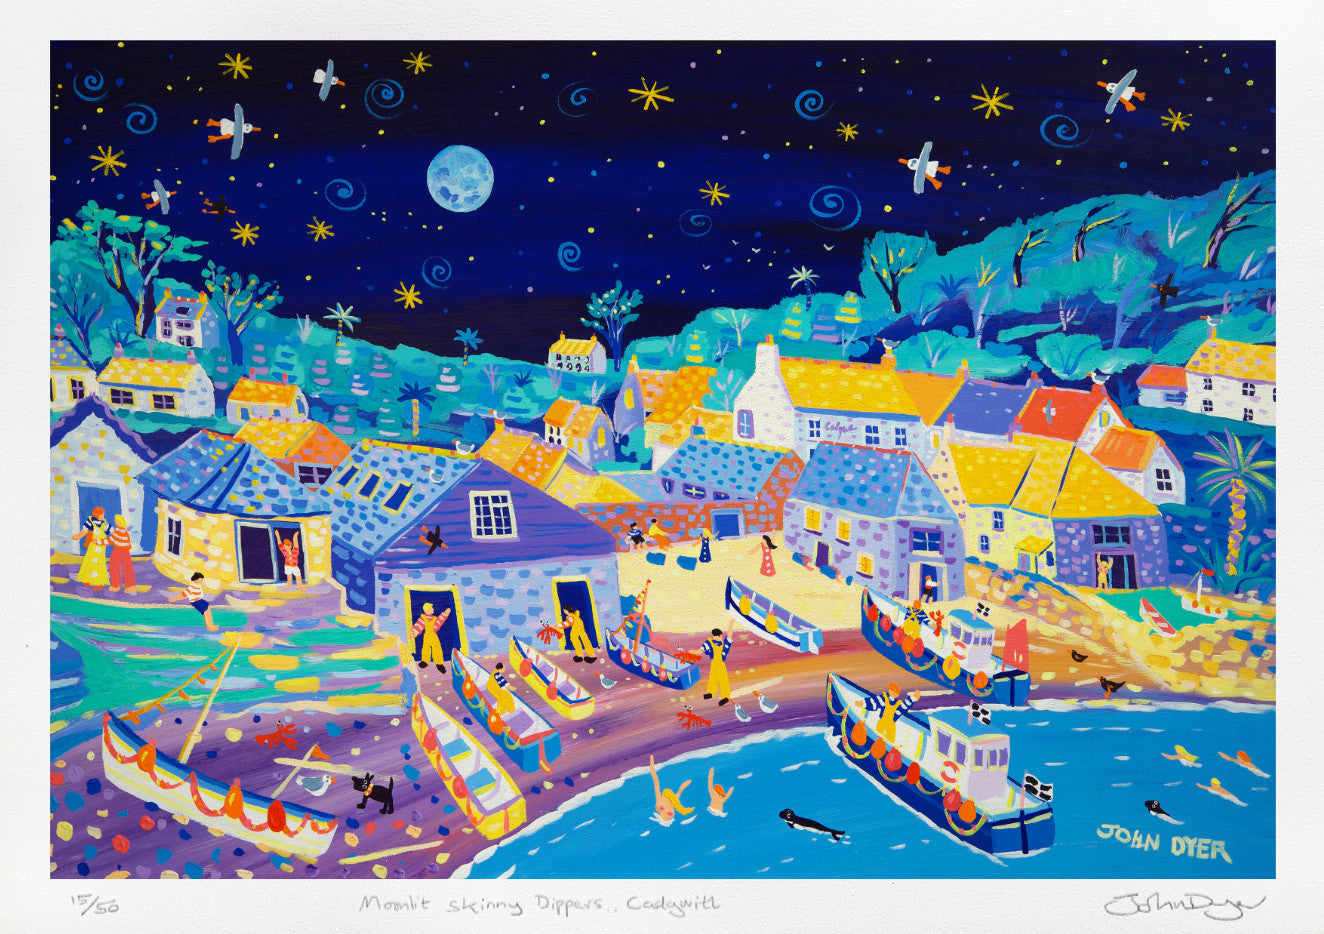 Cornish Art Limited Edition Print by John Dyer. 'Moonlit Skinny Dippers, Cadgwith'. Cornwall Art Gallery Print